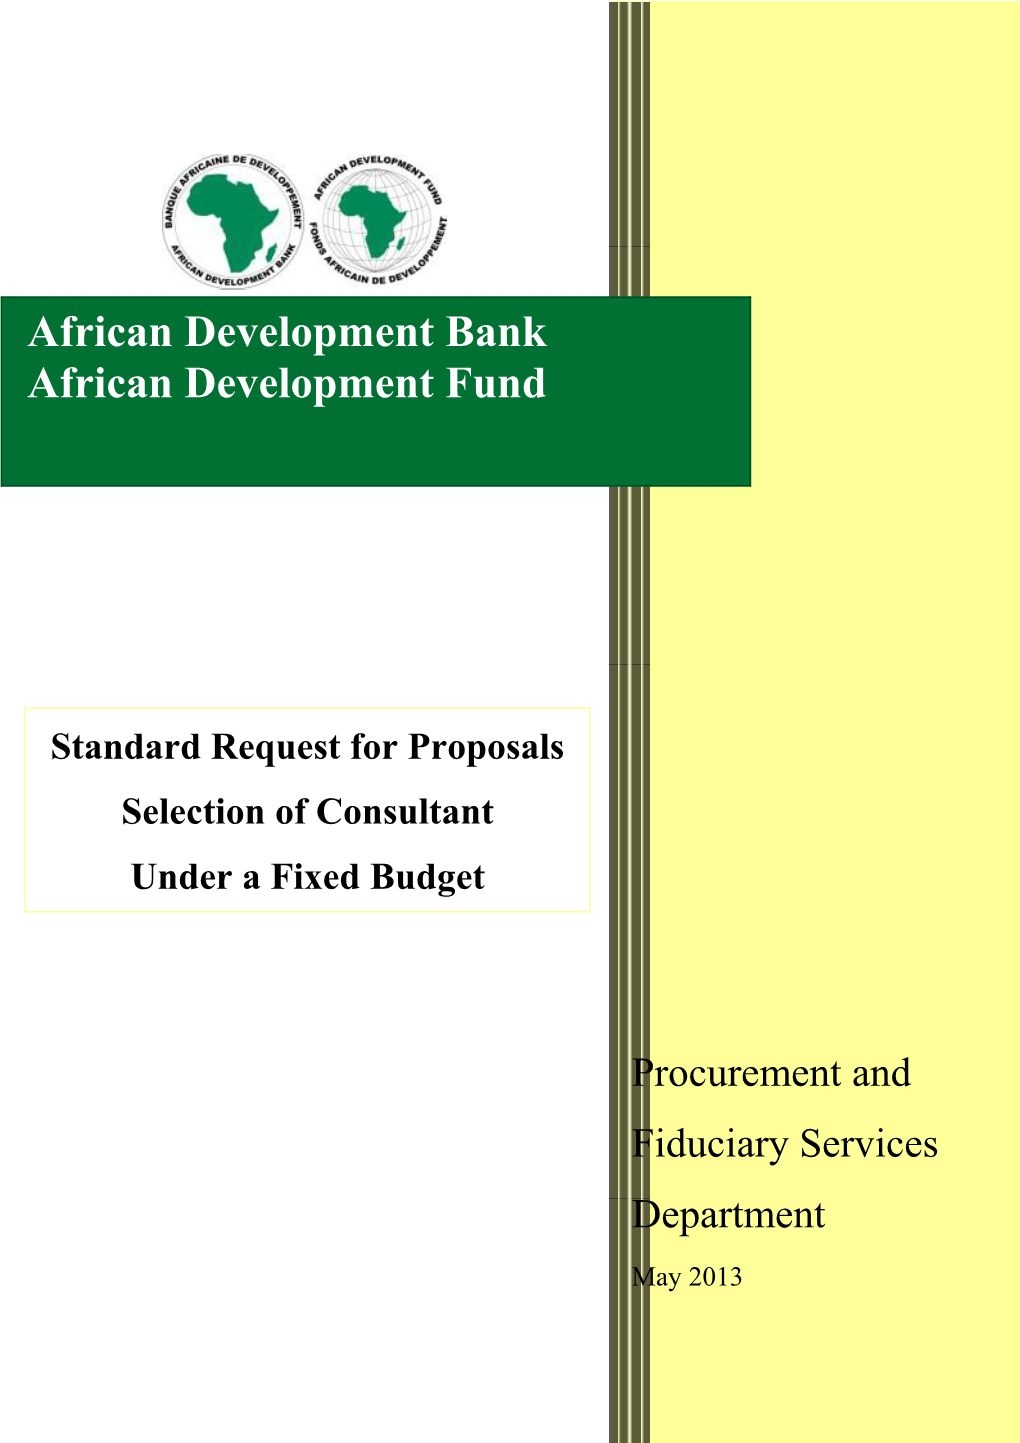 Standard Request for Proposals to Be Used for Selection Under a Fixed Budget (FBS)